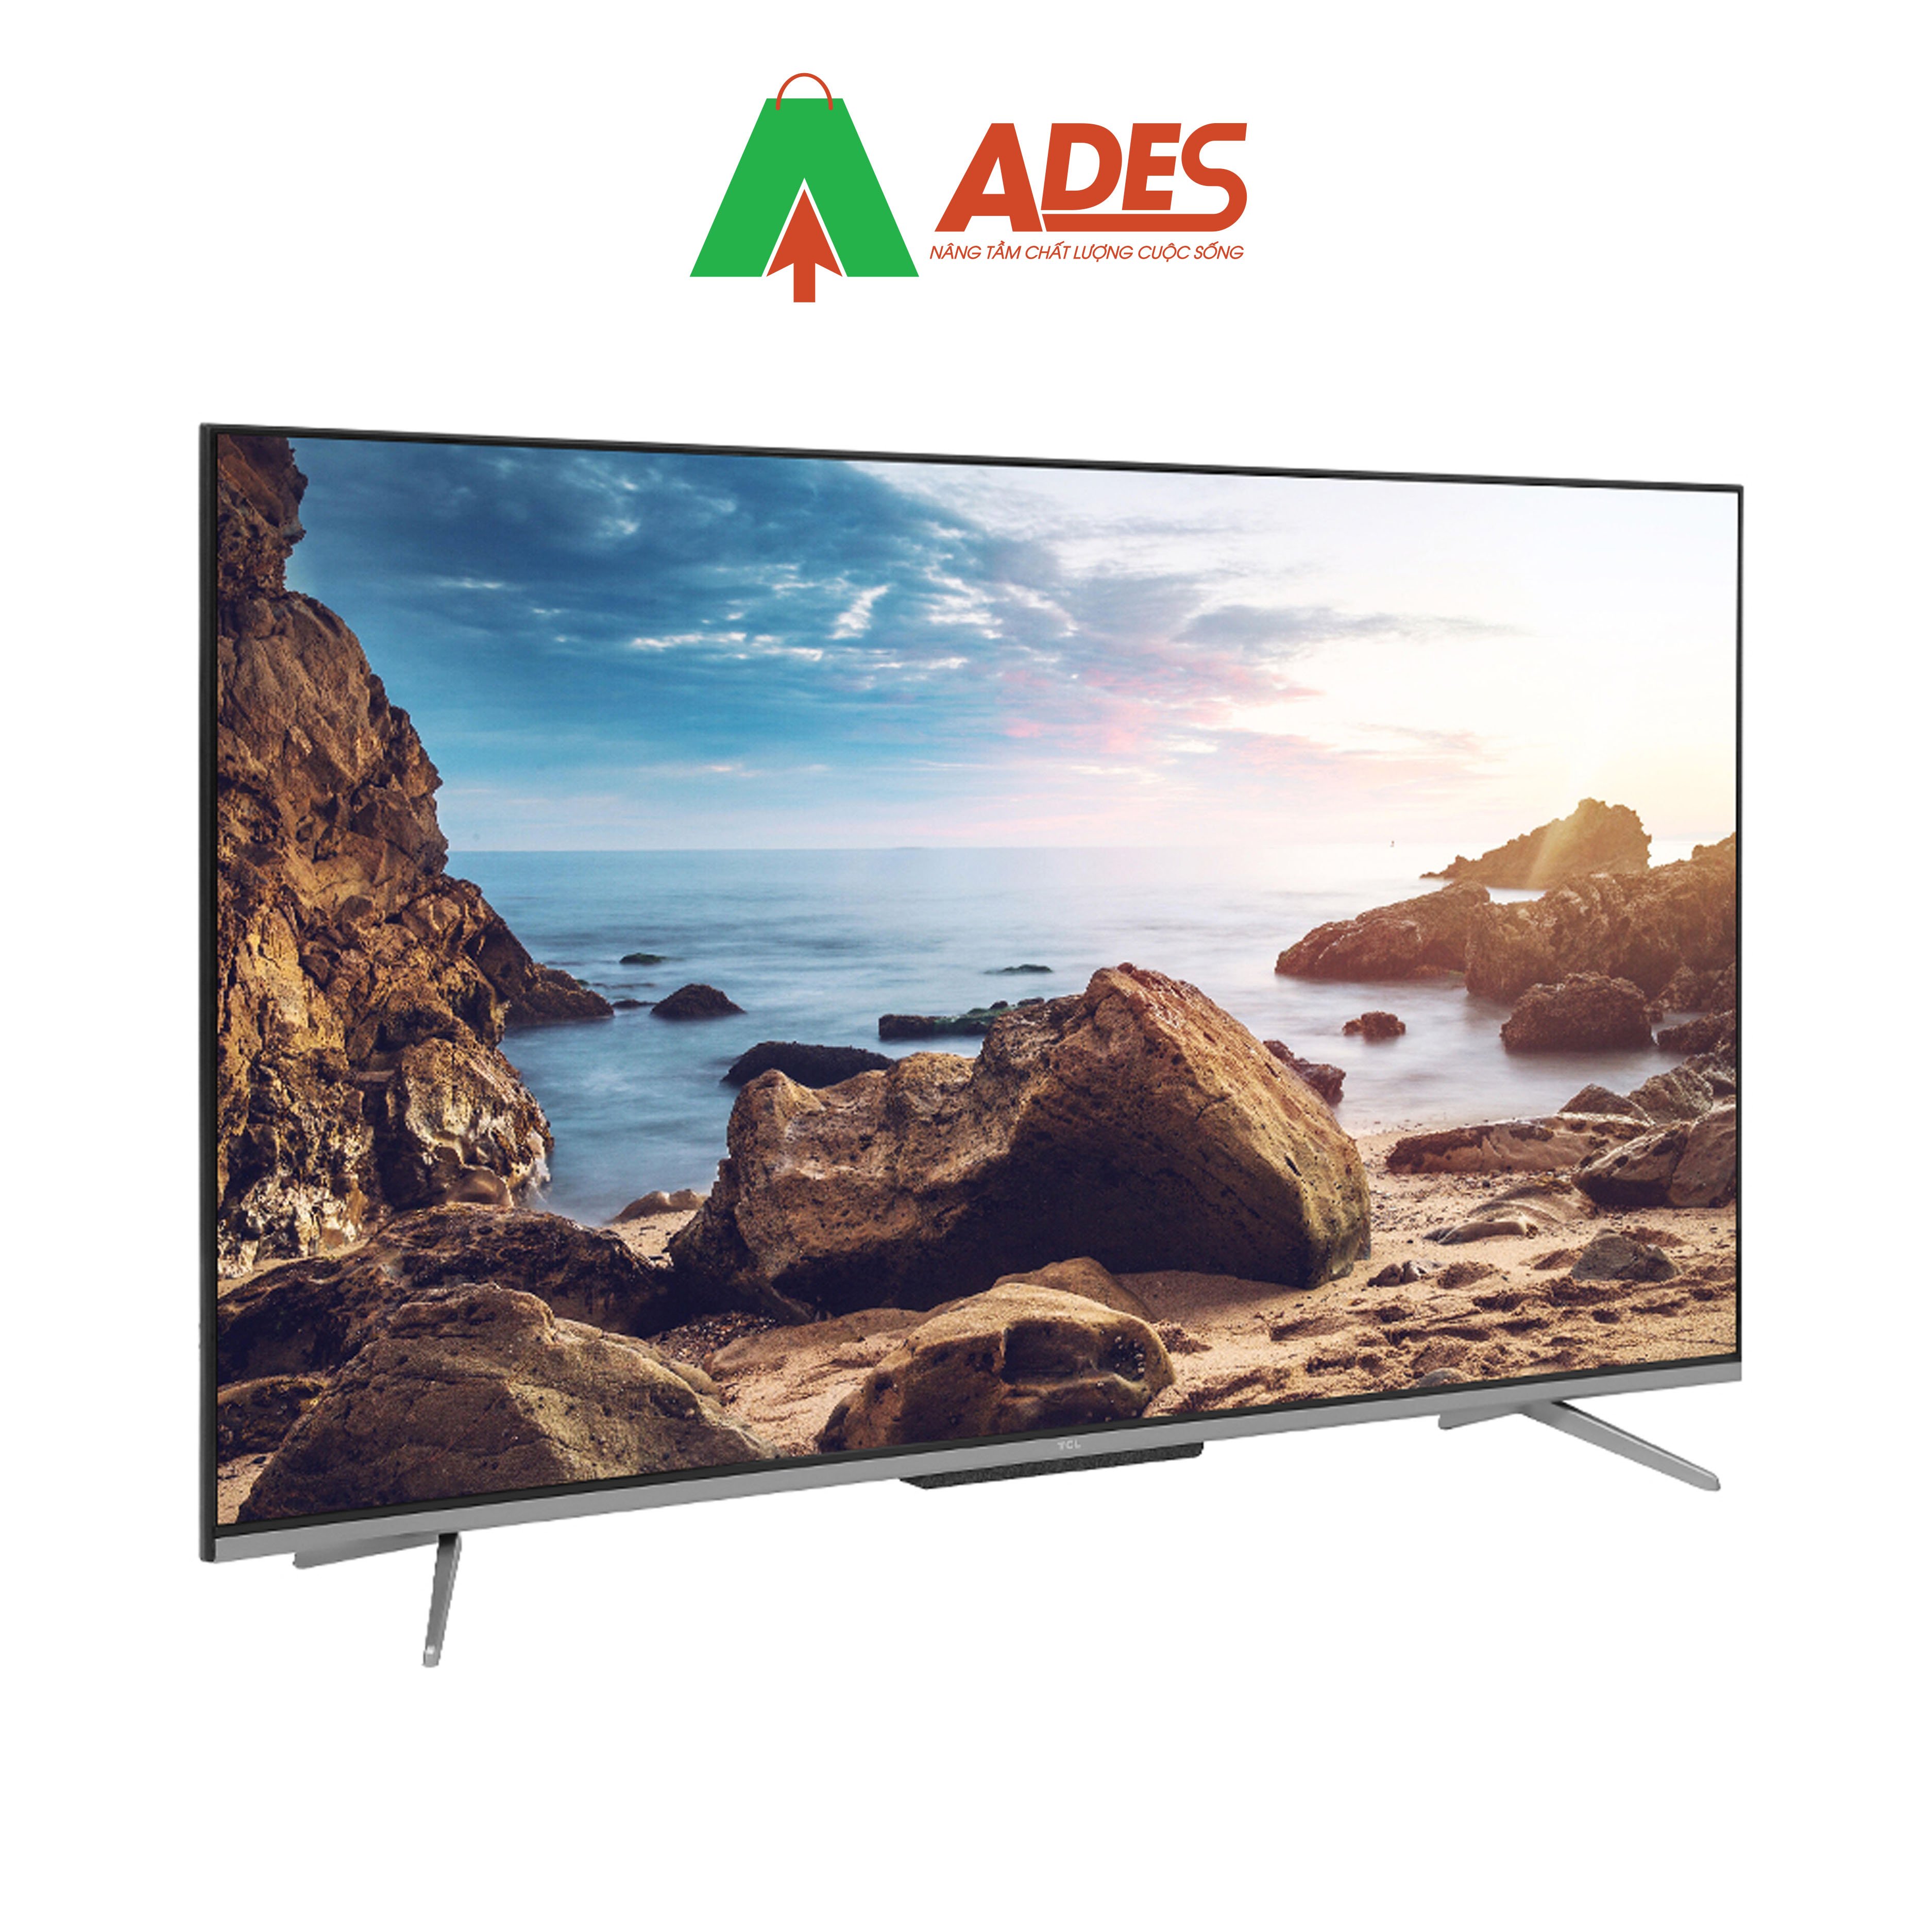 Hinh anh thuc te Android Tivi TCL 43 Inch 43P725